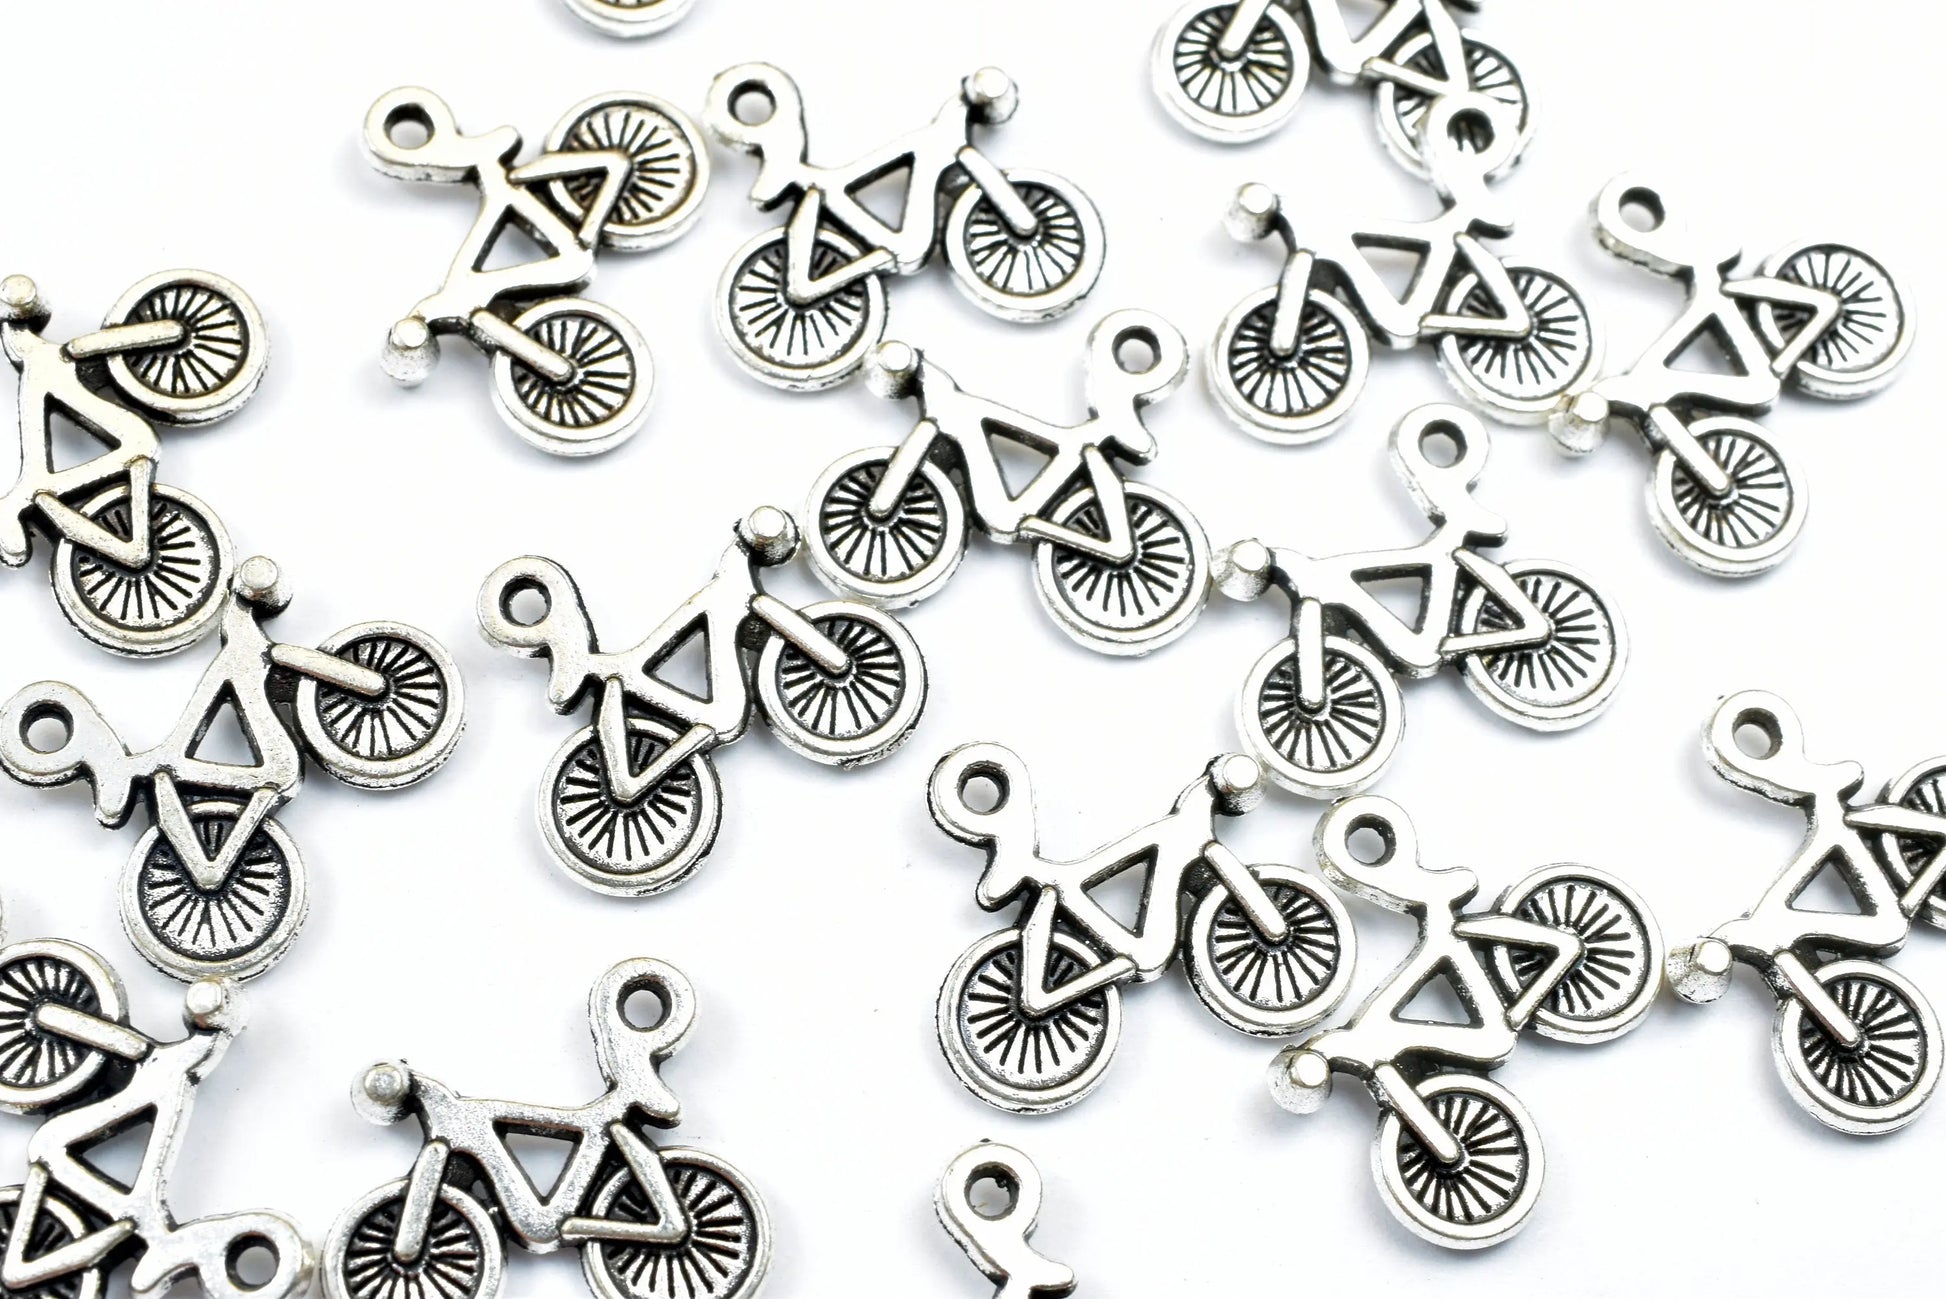 Bicycle Charms Alloy Antique Bike Silver Size 14x16mm Jump Ring Size 1.5mm Finding For Jewelry Making 16PCs/PK - BeadsFindingDepot